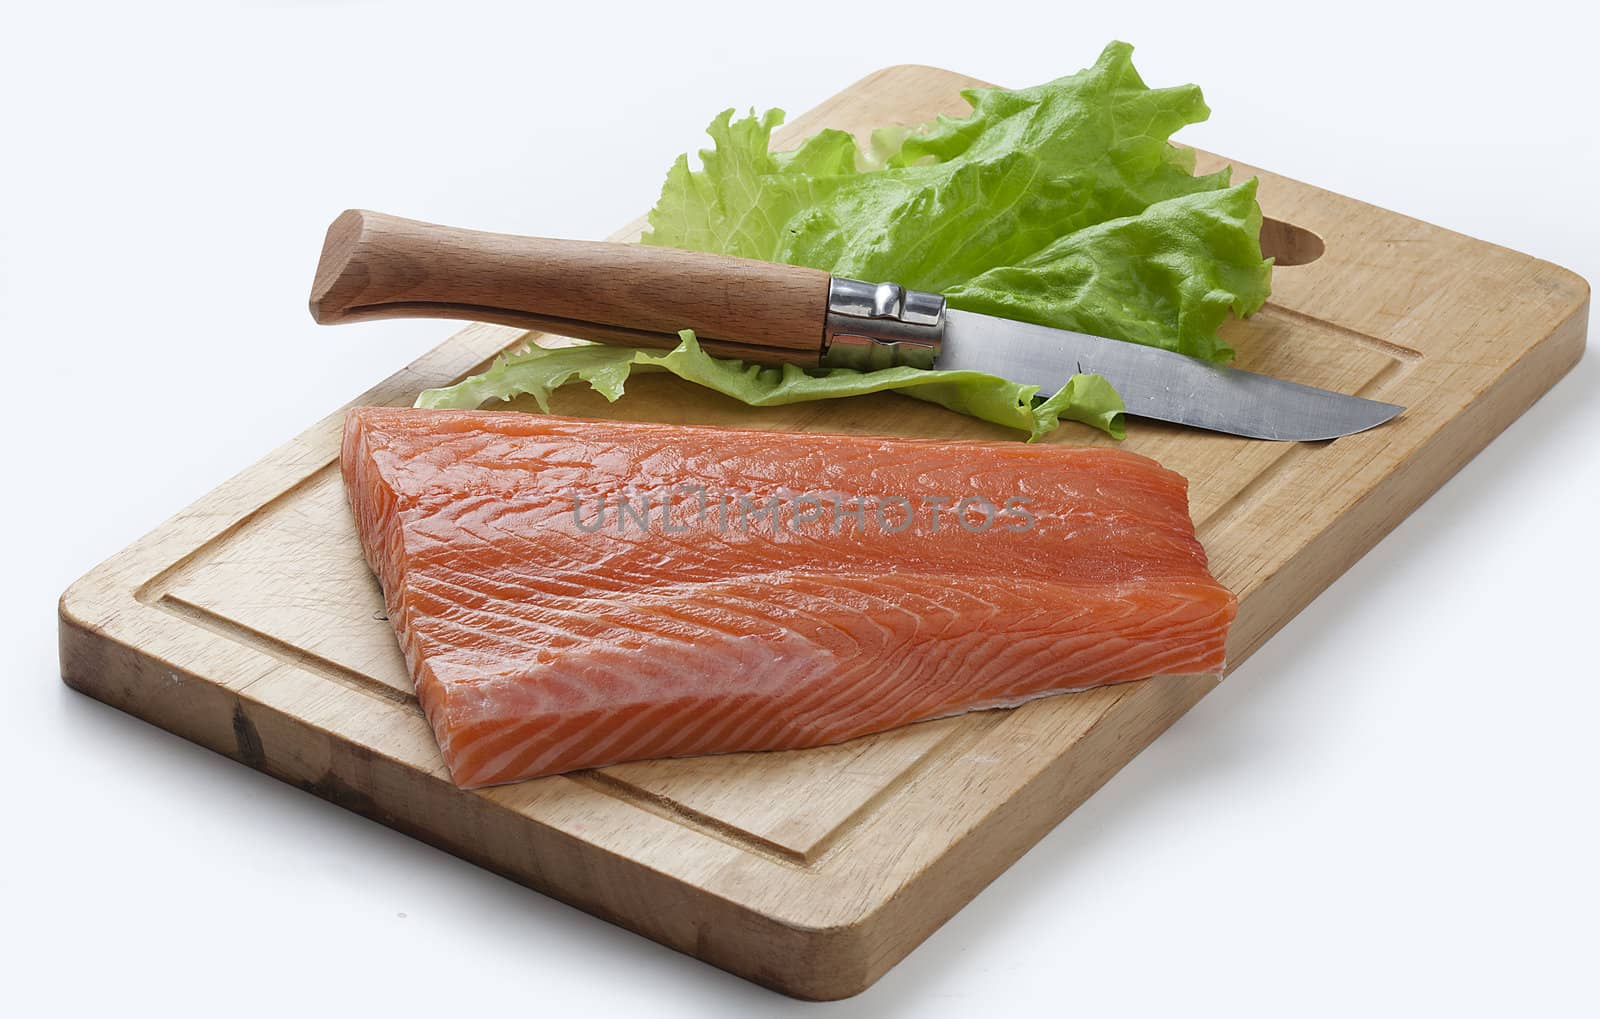 Chunk of raw salmon's fillet with knife and lettuce on the wooden board